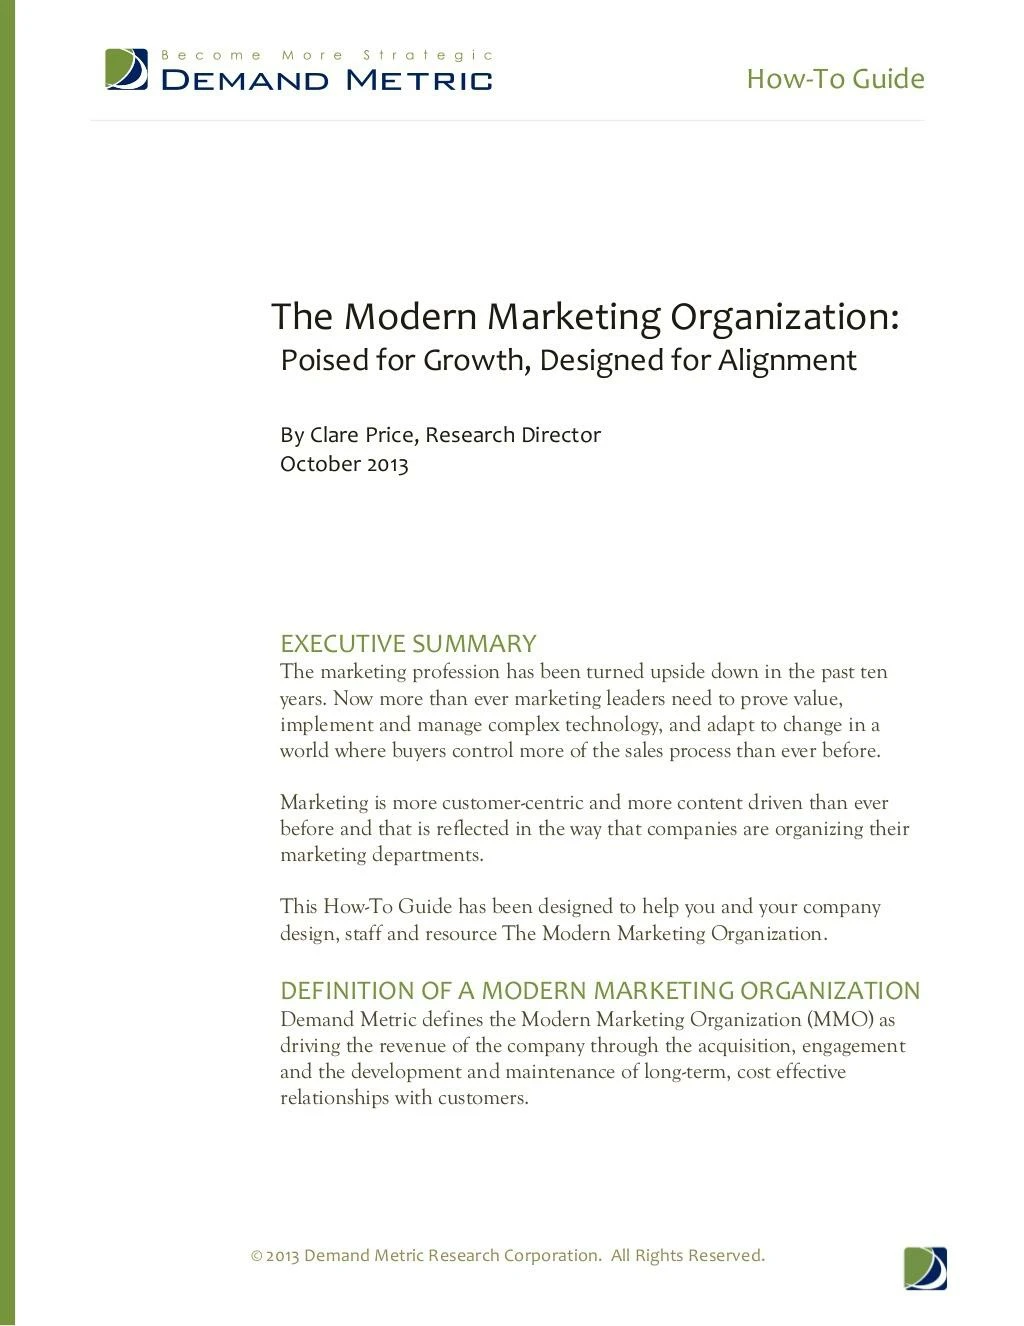 how to guide the modern marketing organization